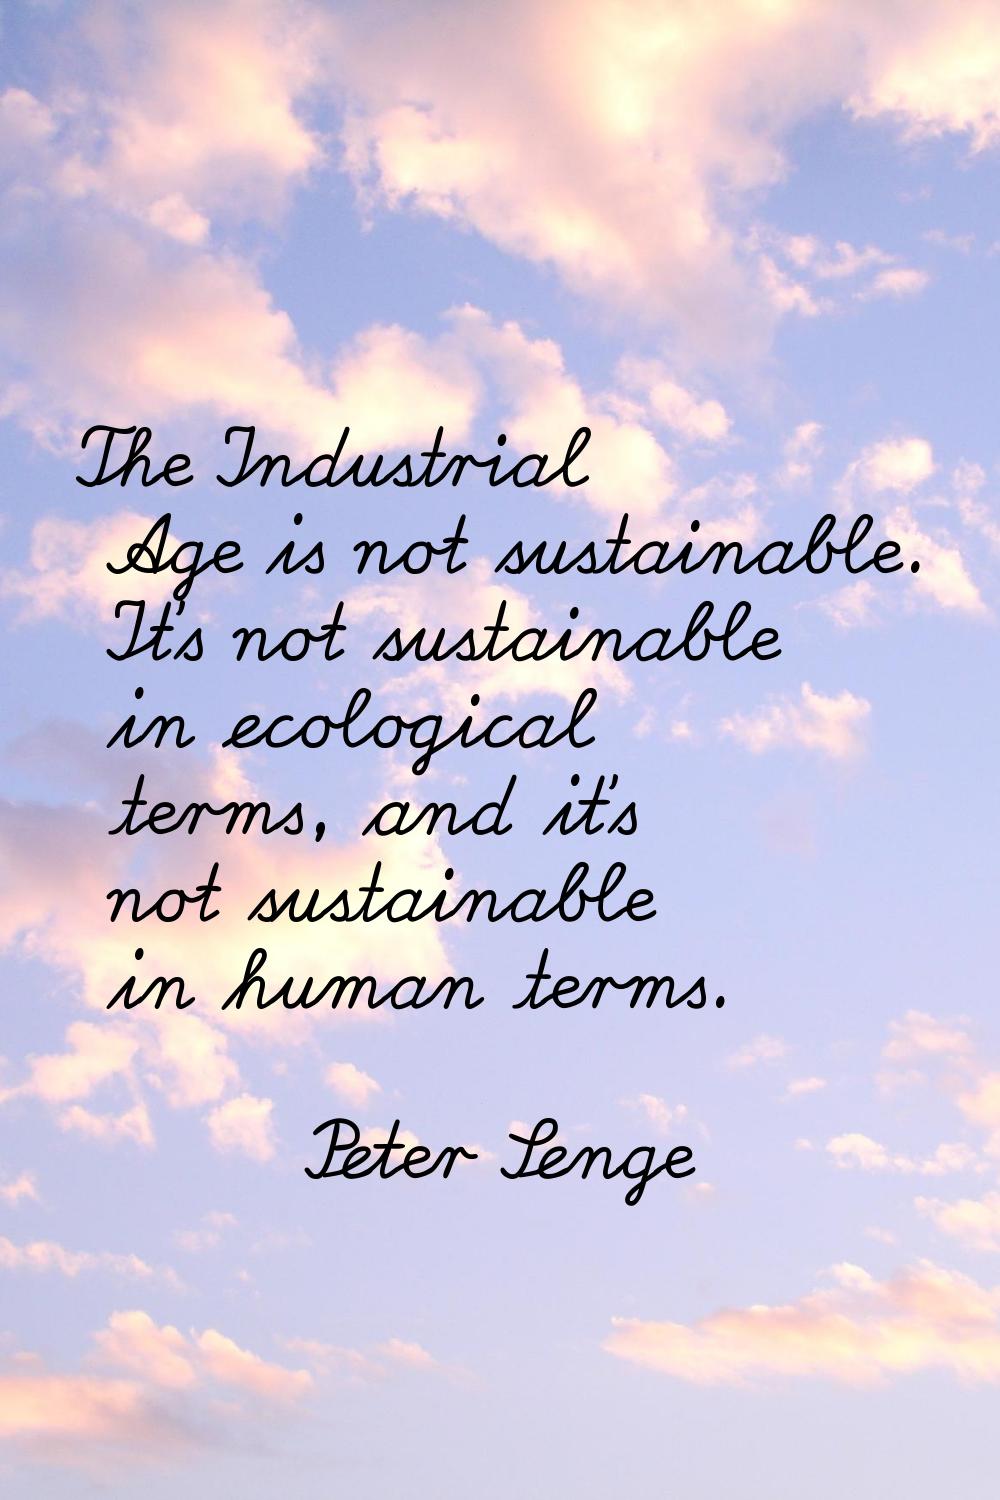 The Industrial Age is not sustainable. It's not sustainable in ecological terms, and it's not susta